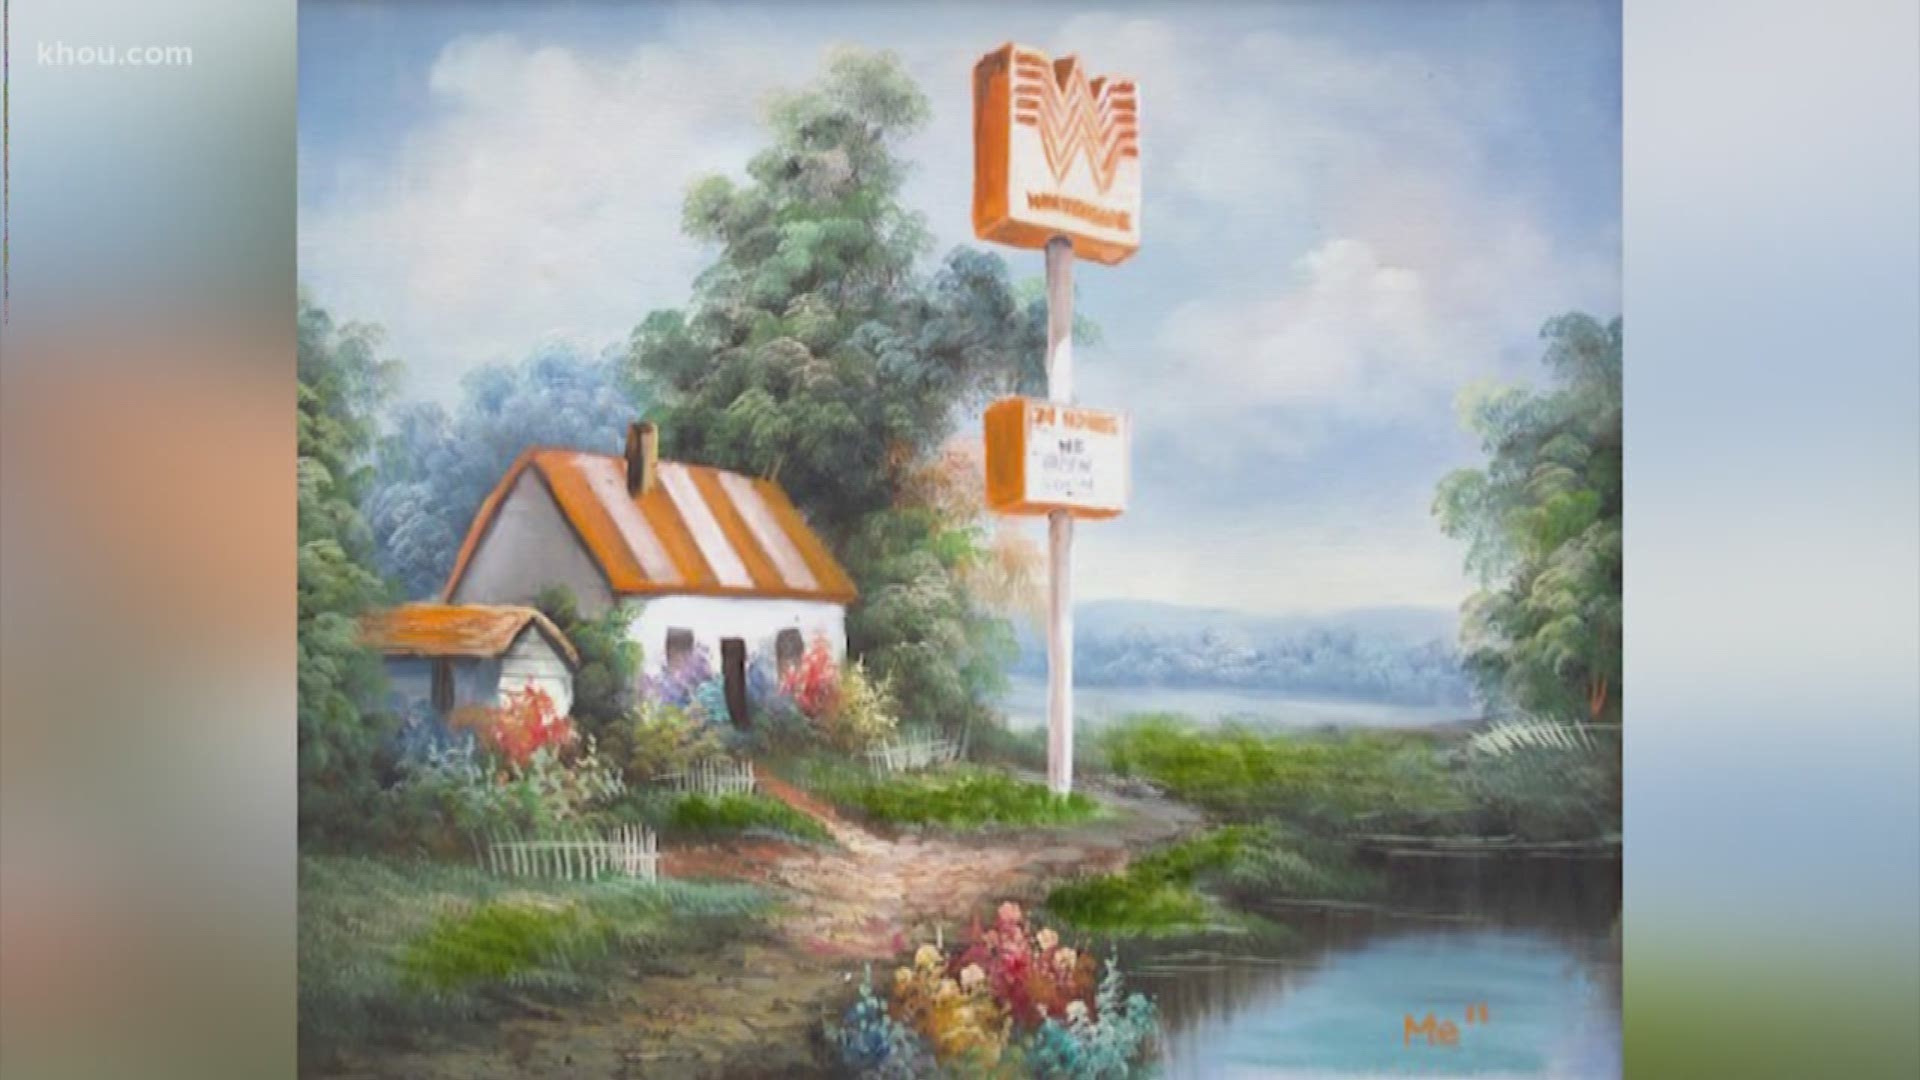 This art of fast food restaurants and businesses is totally Texas!